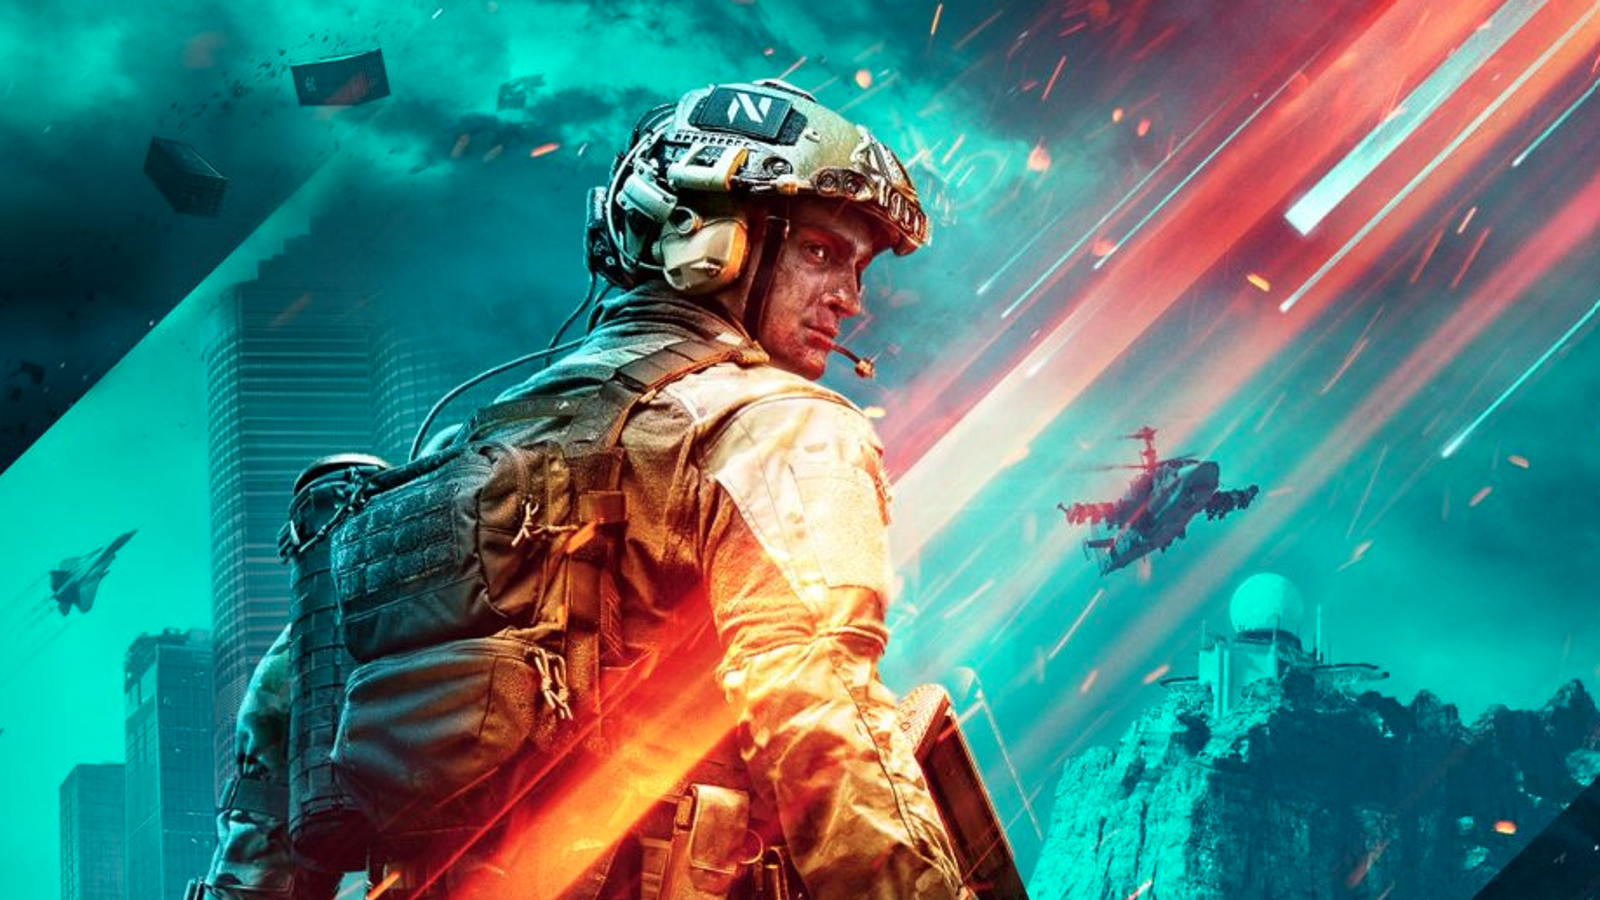 DICE marketing teases 'Battlefield will never be the same